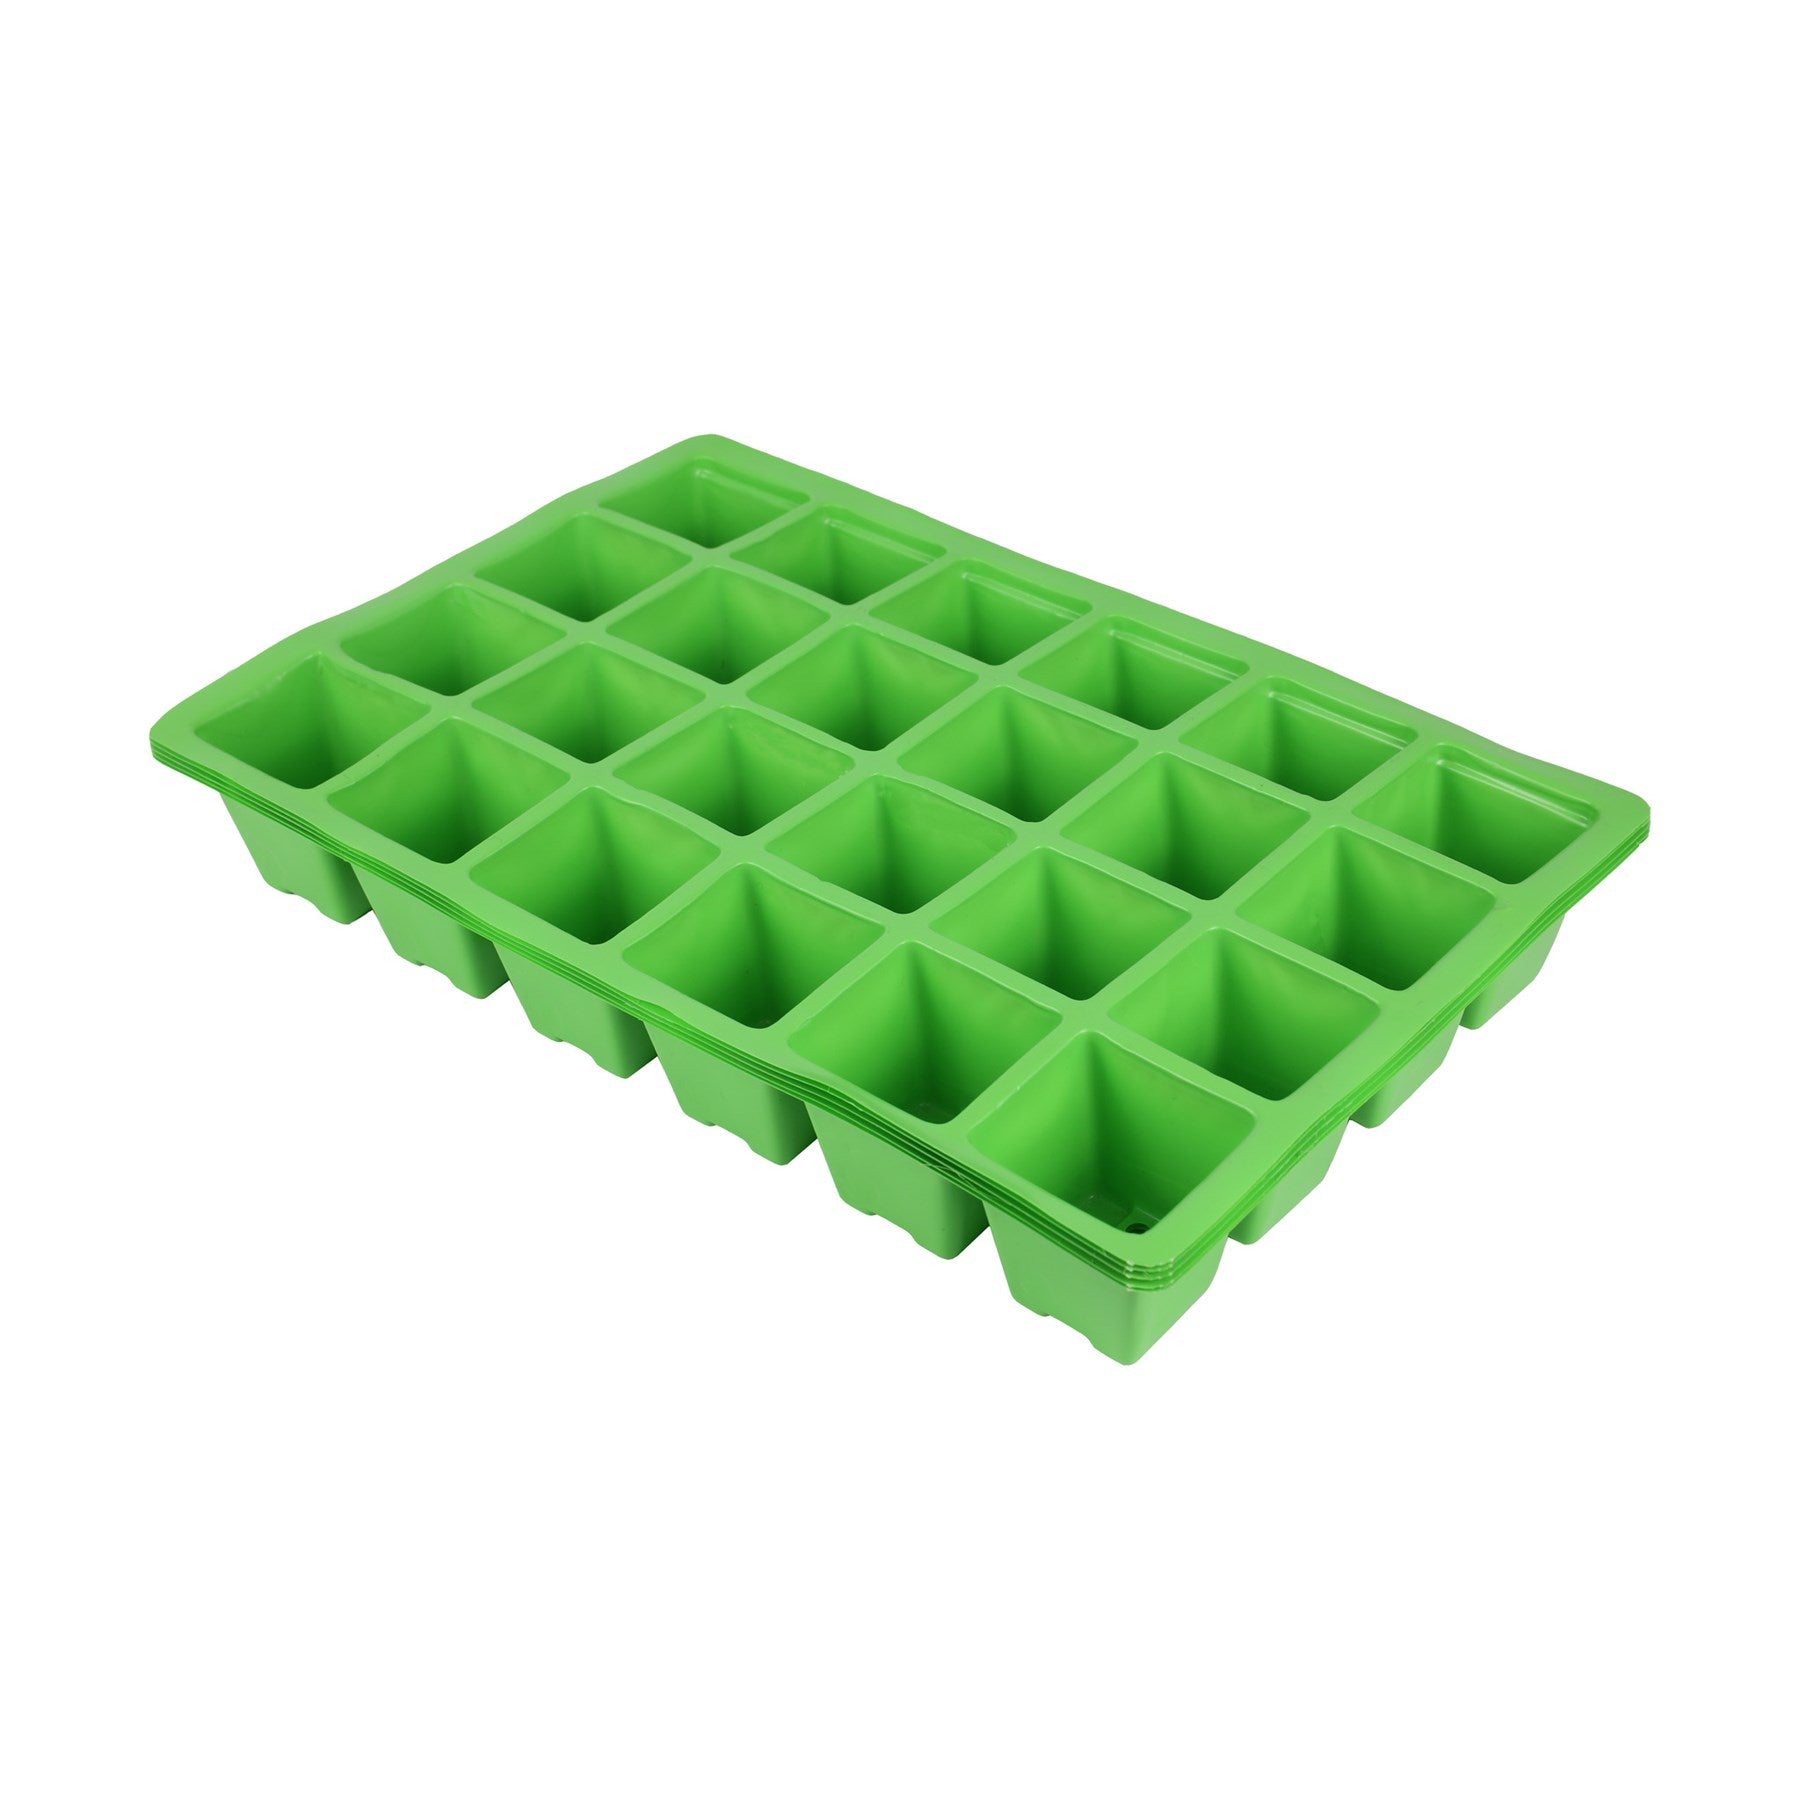 Grow-Sure Visiroot 12 Cell Seed Tray Inserts 8pk | 70200217